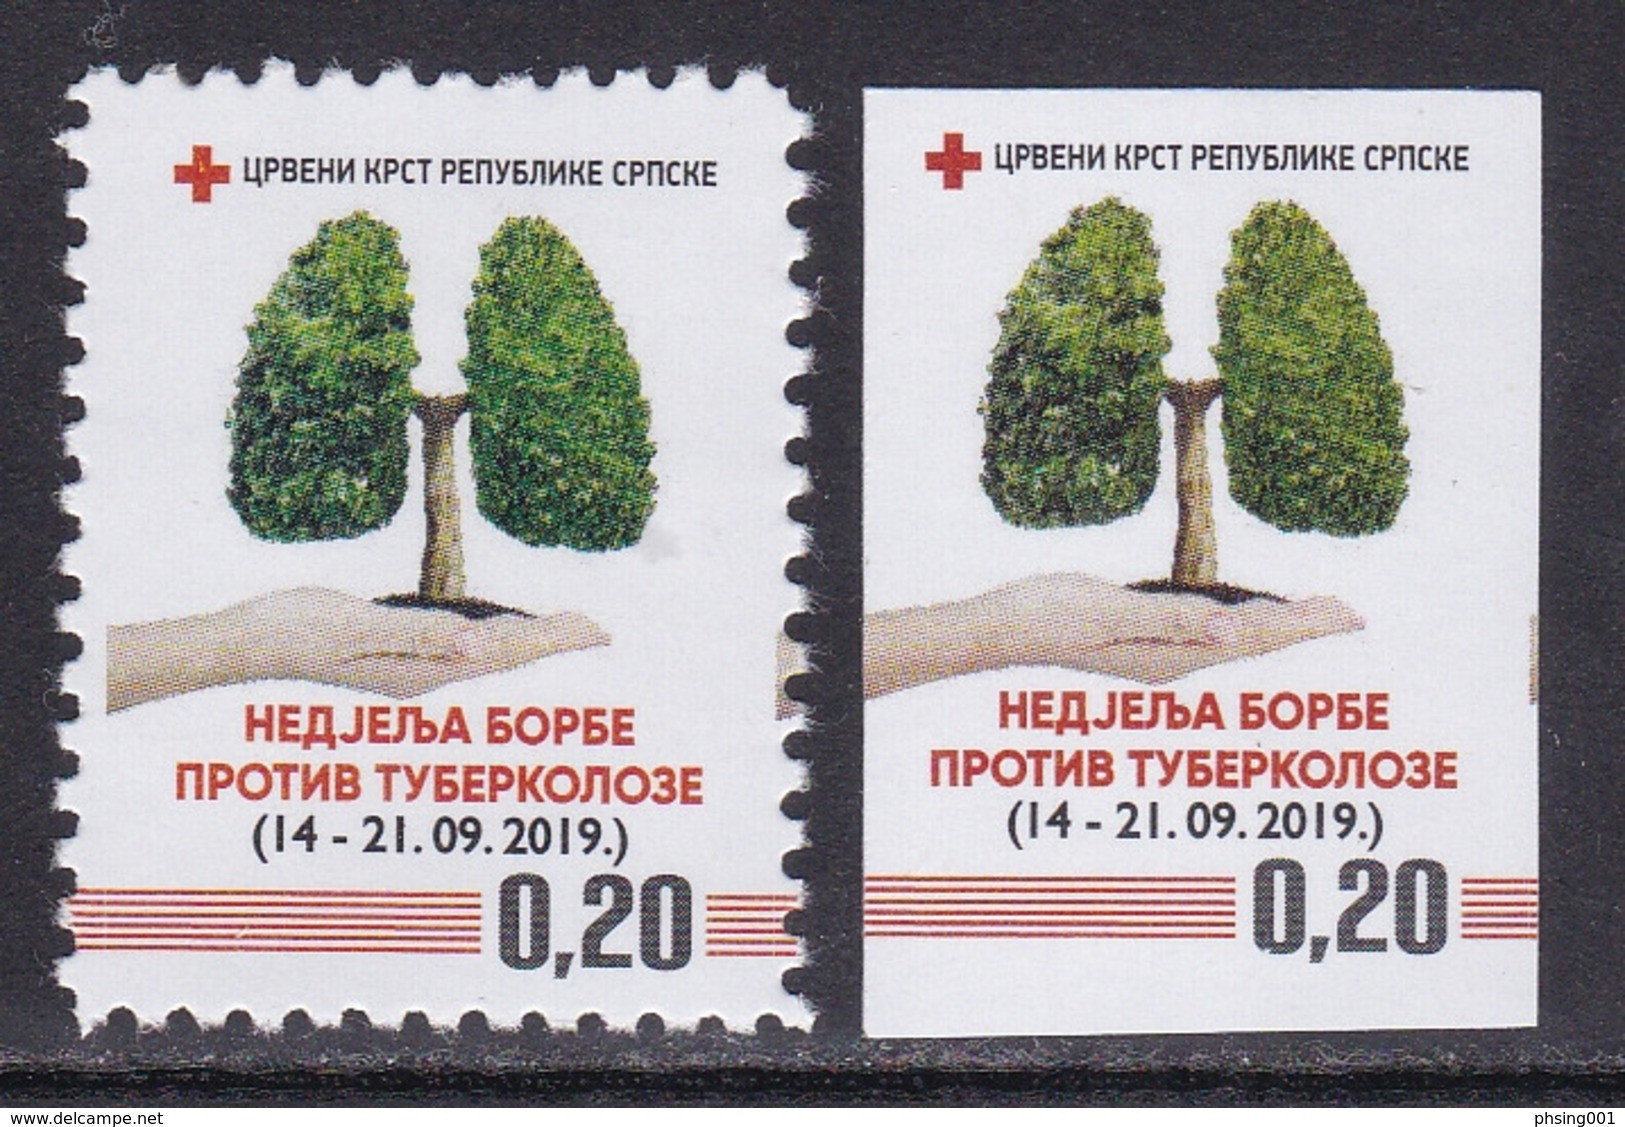 Bosnia Serbia 2019 TBC Red Cross Tax Charity Surcharge, Perforated + Imperforated Stamp MNH - Croce Rossa